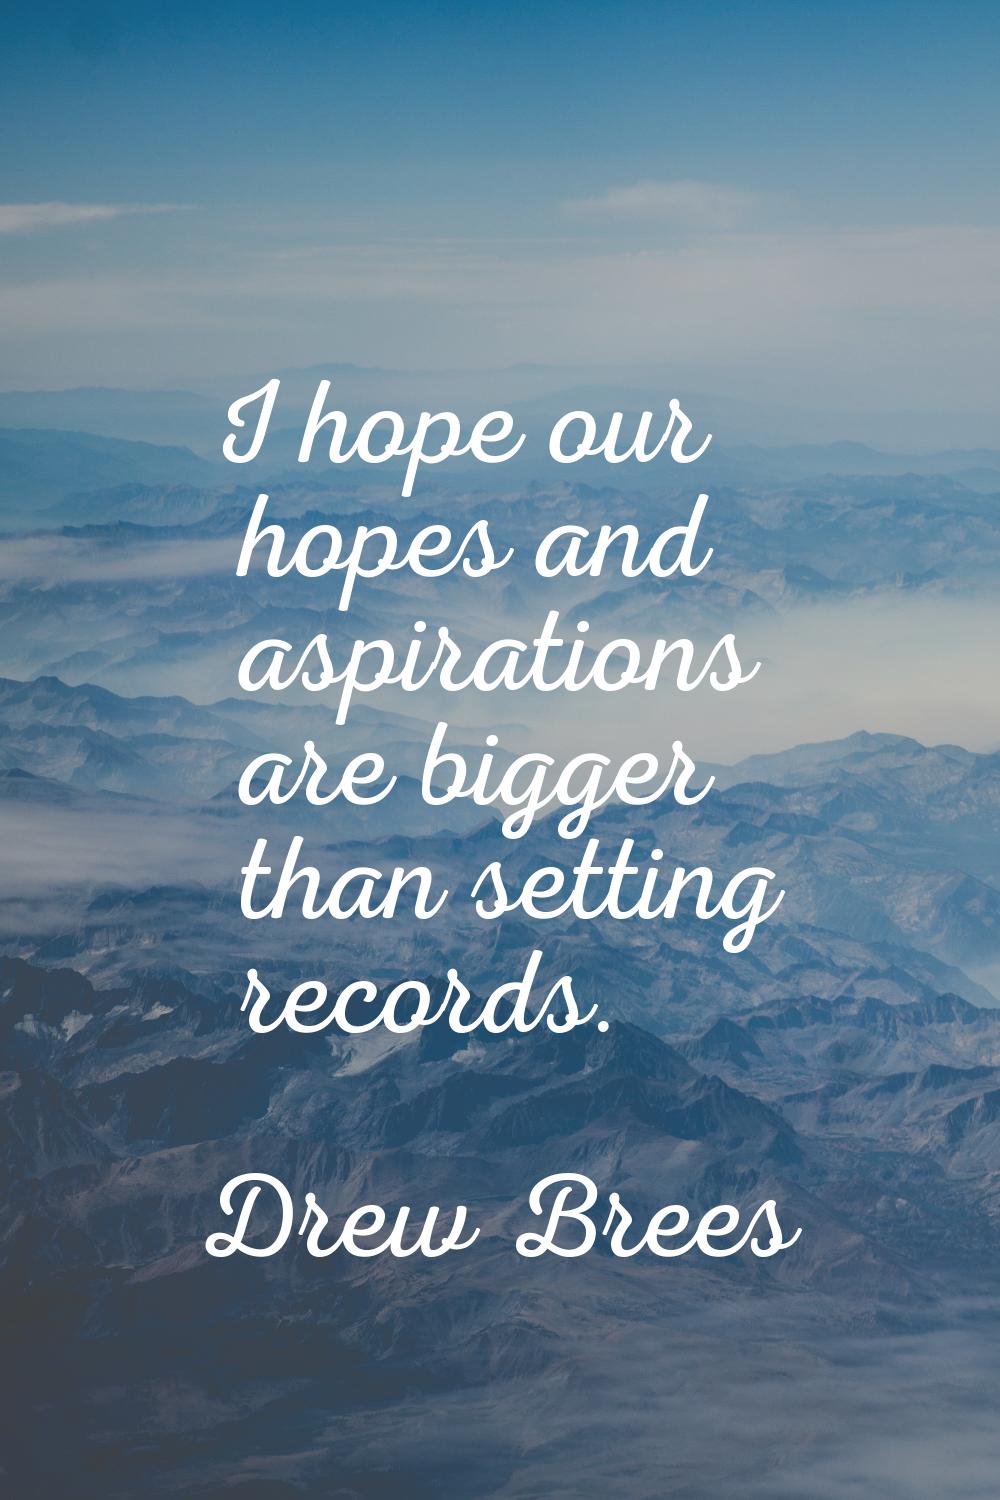 I hope our hopes and aspirations are bigger than setting records.